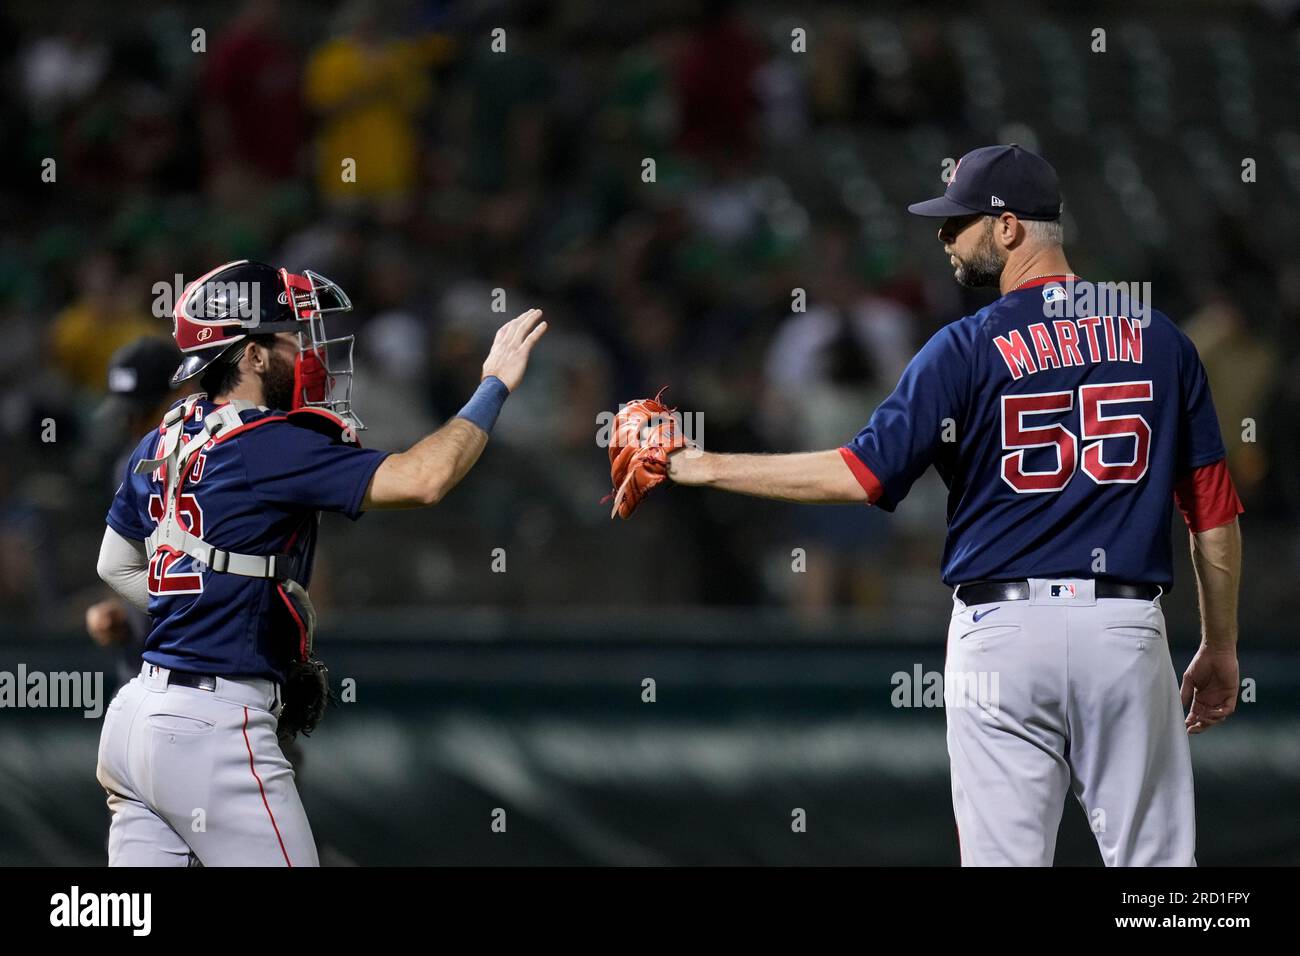 Boston Red Sox catcher Connor Wong, left, and pitcher Chris Martin